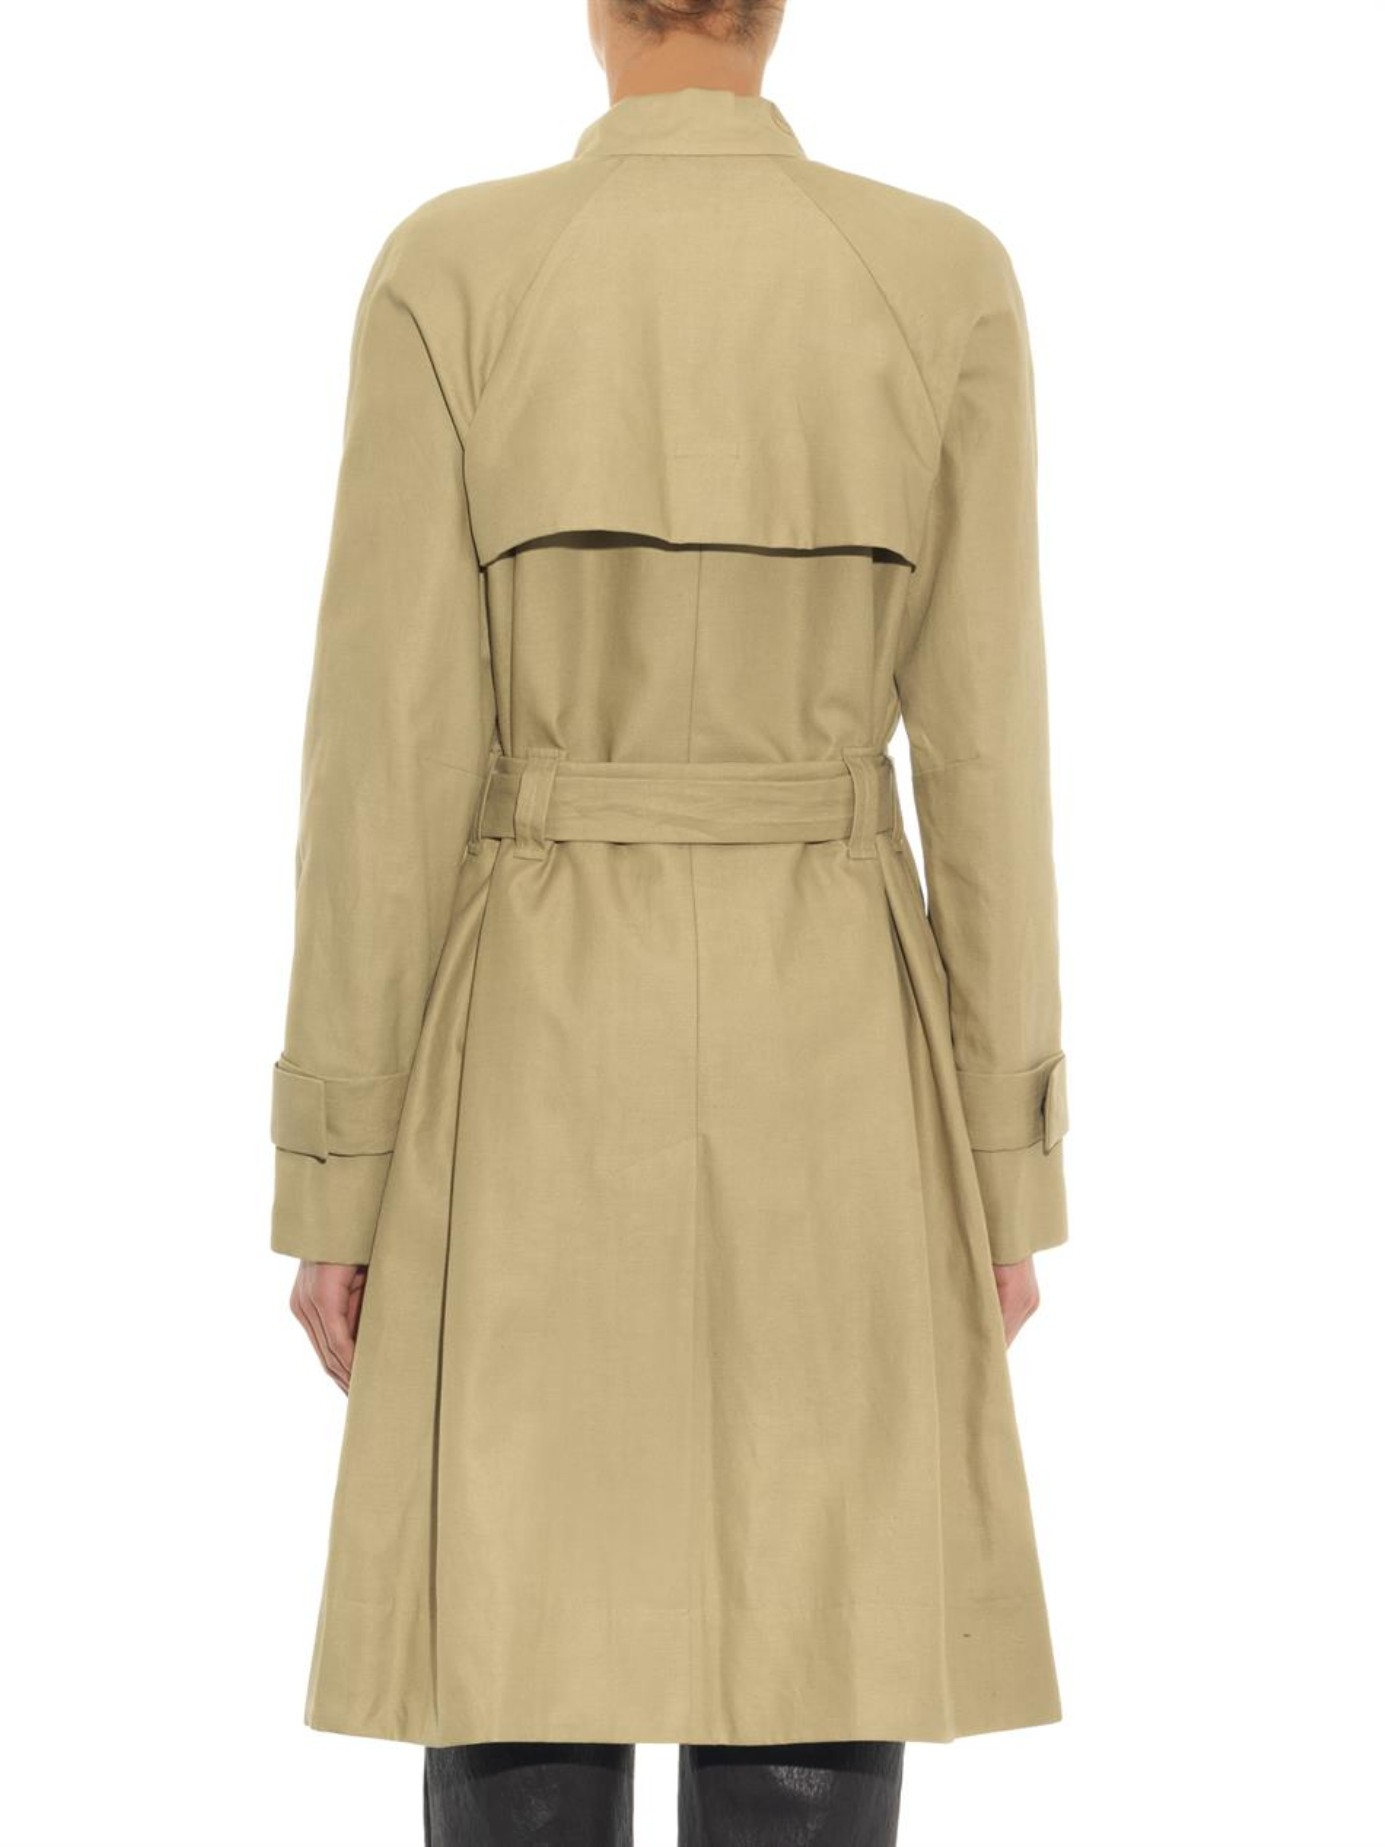 Isabel Marant Only Lightweight Trench Coat in Beige (Natural) - Lyst